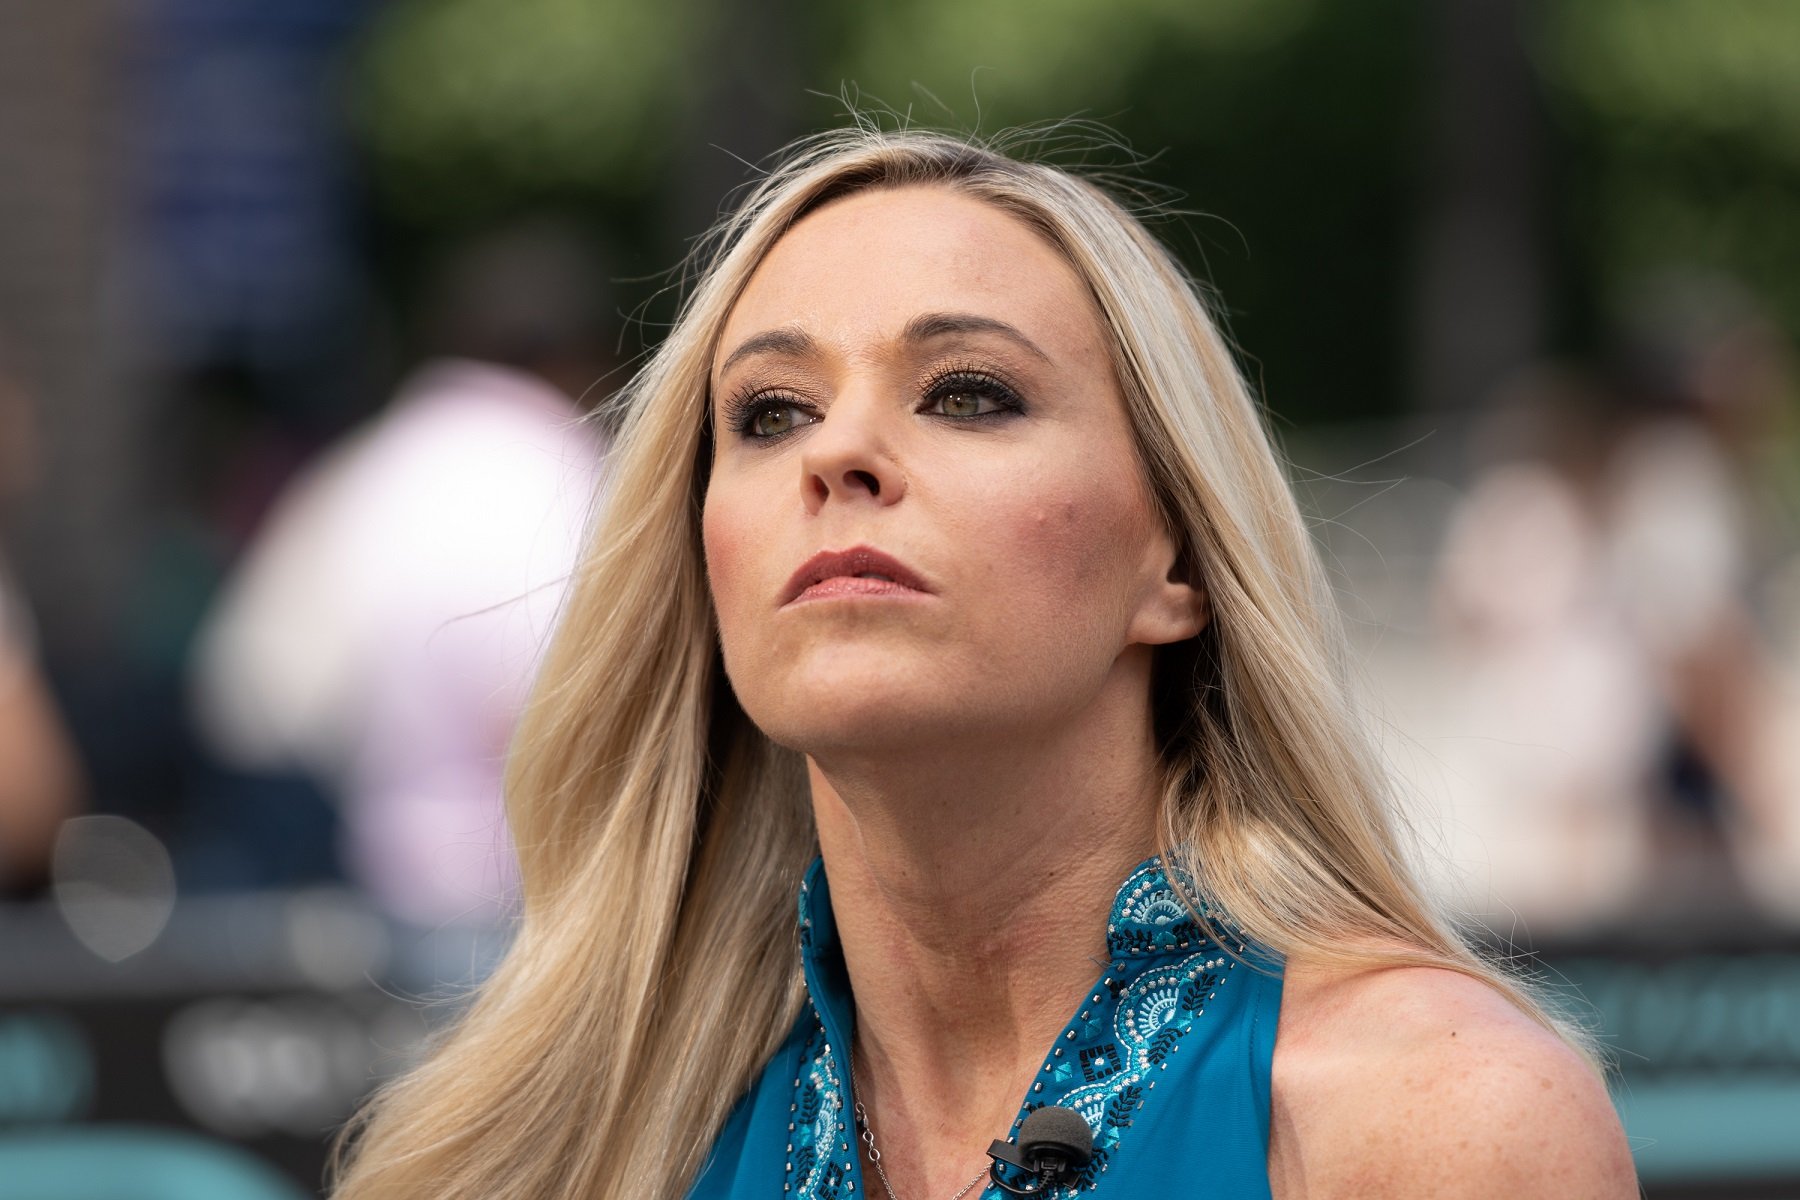 Kate Gosselin, formerly of Kate Plus 8, in a blue top